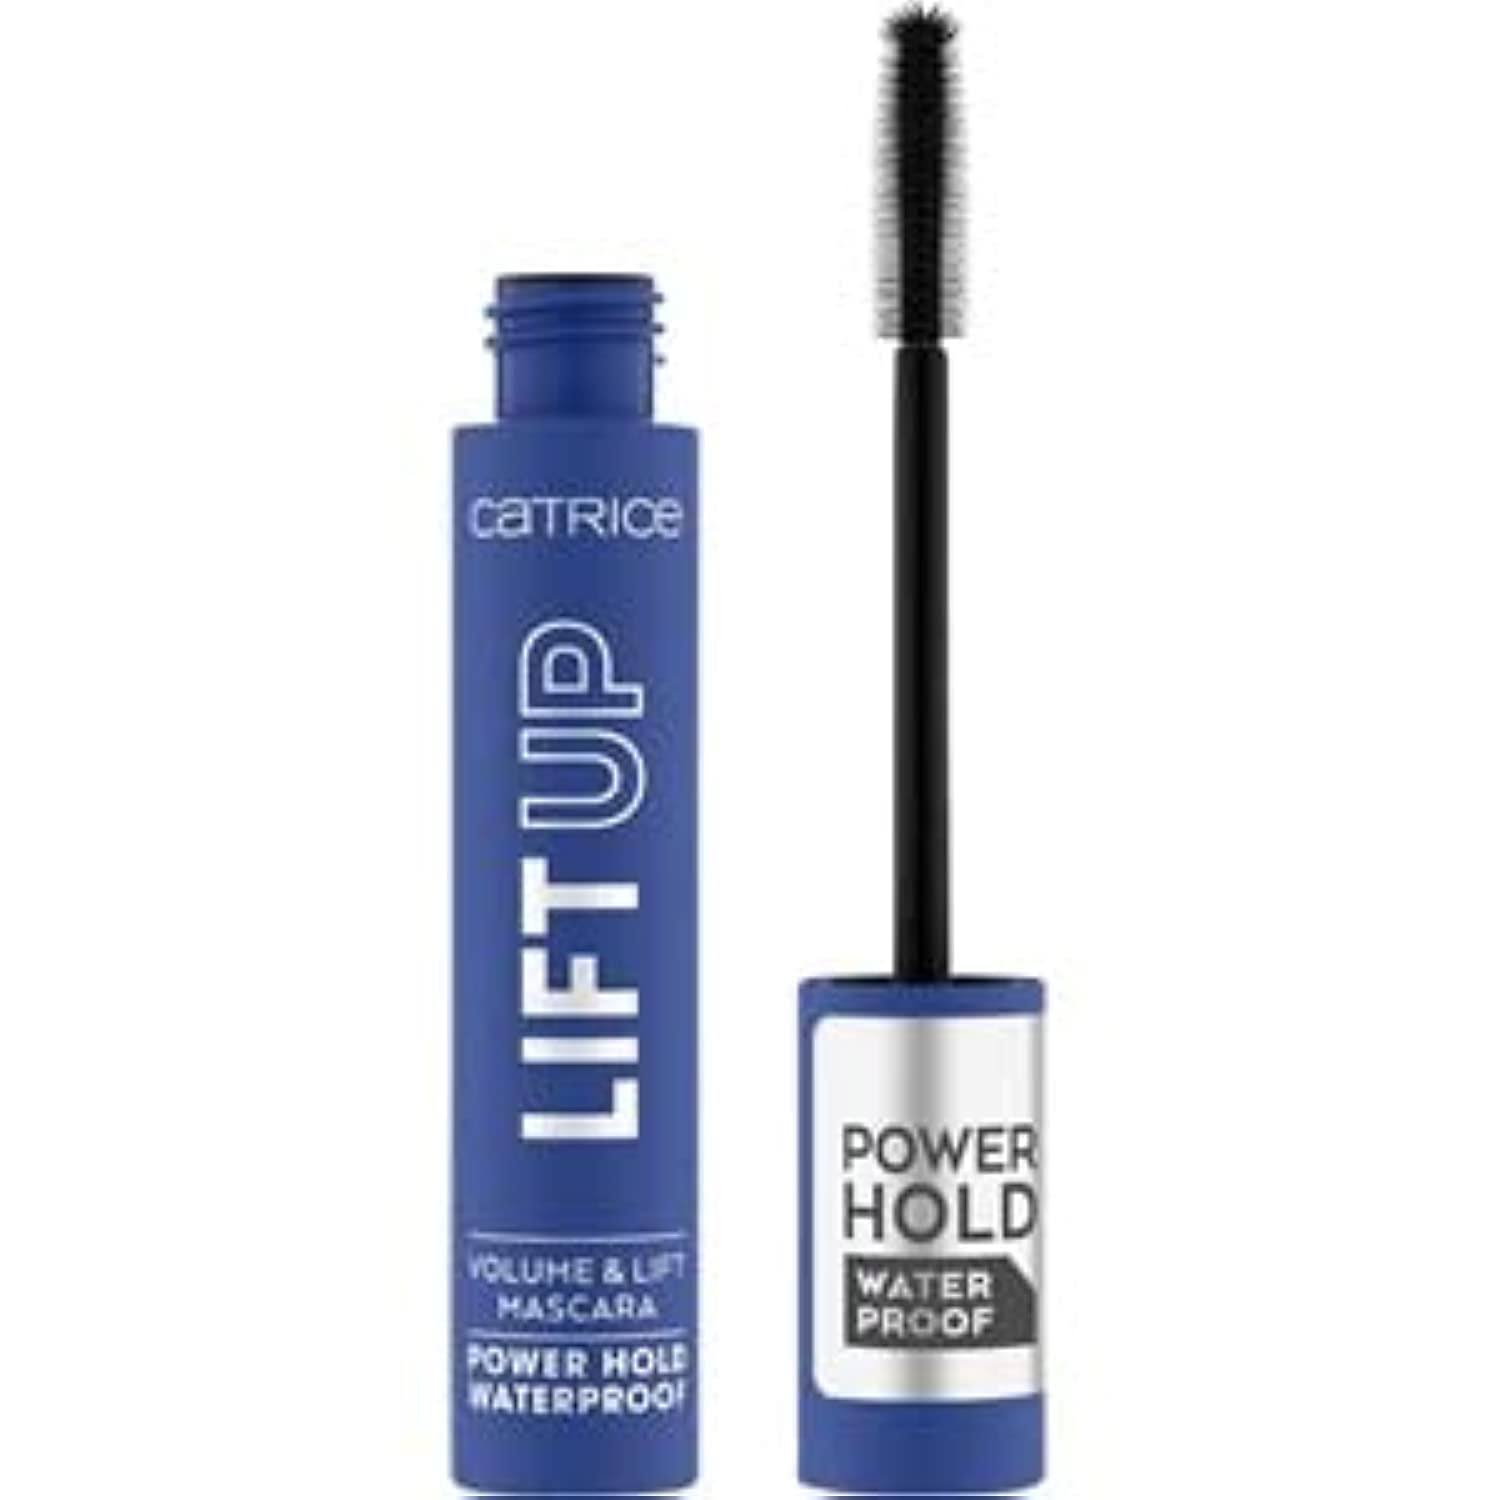 Catrice Lift Up Volume & Lift Power Hold Waterproof Mascara Color Black 11ml